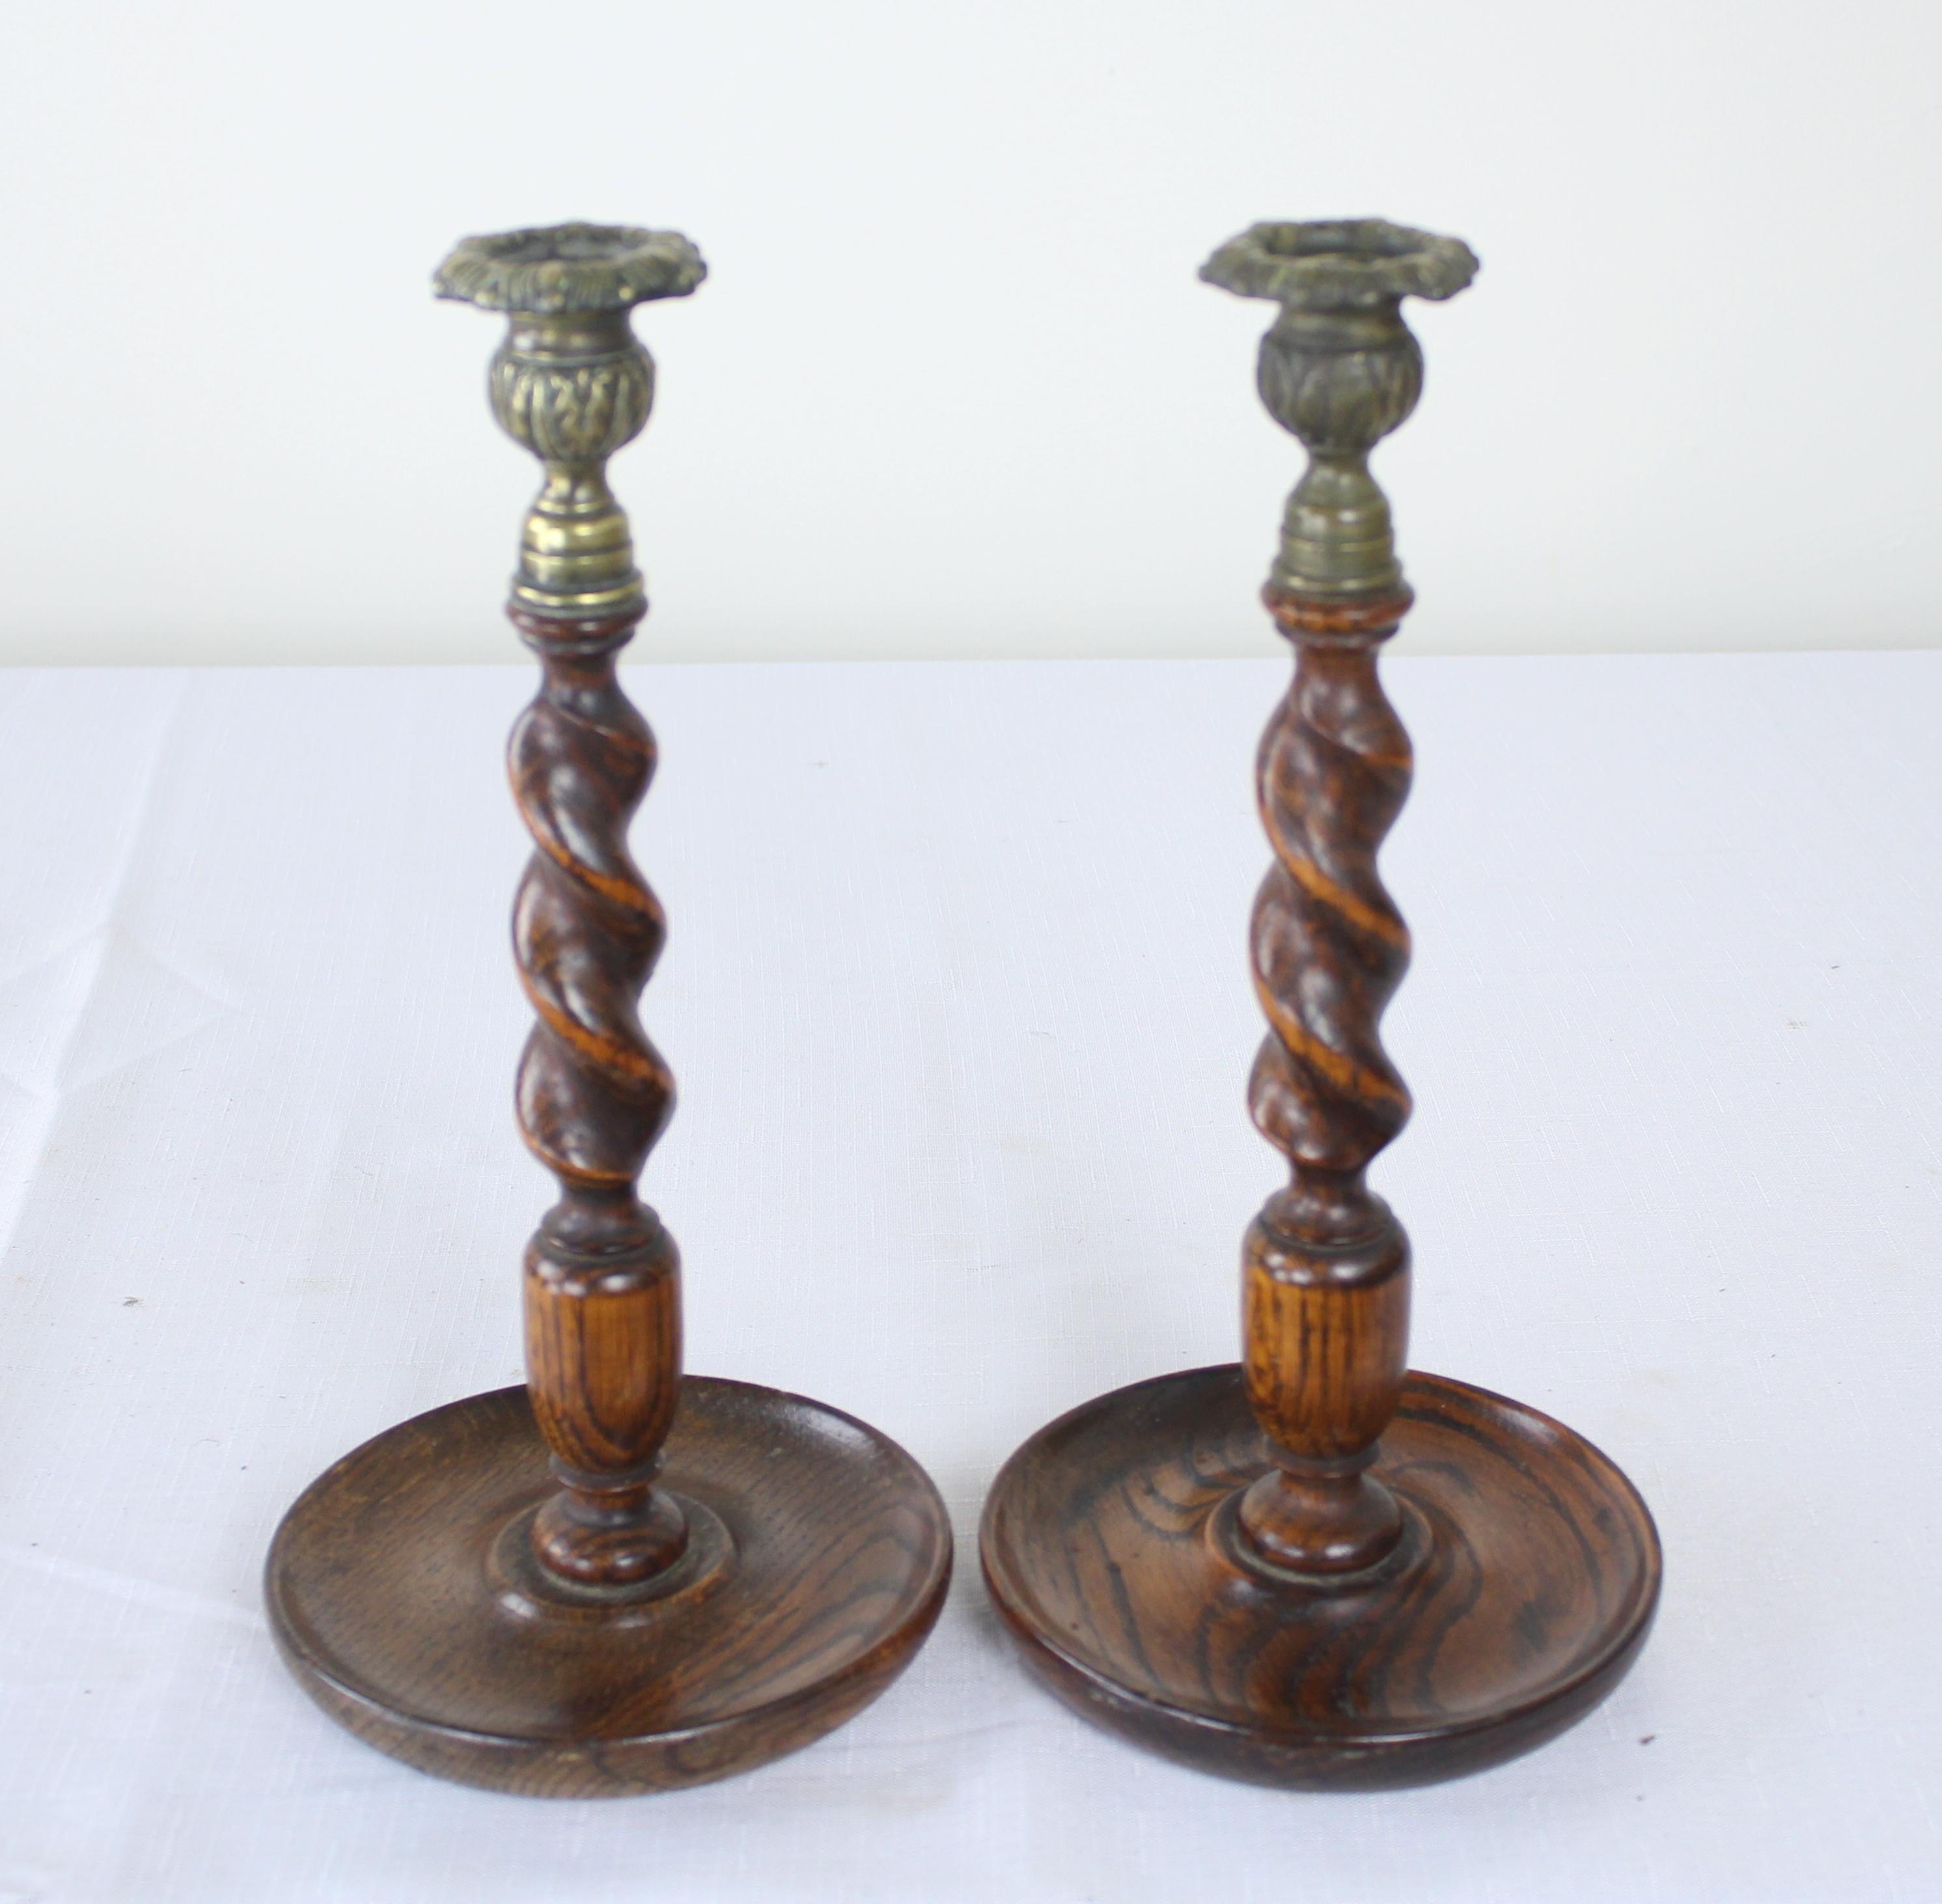 Two pairs of oak candlesticks, England, circa 1900. Heights vary from 10-12